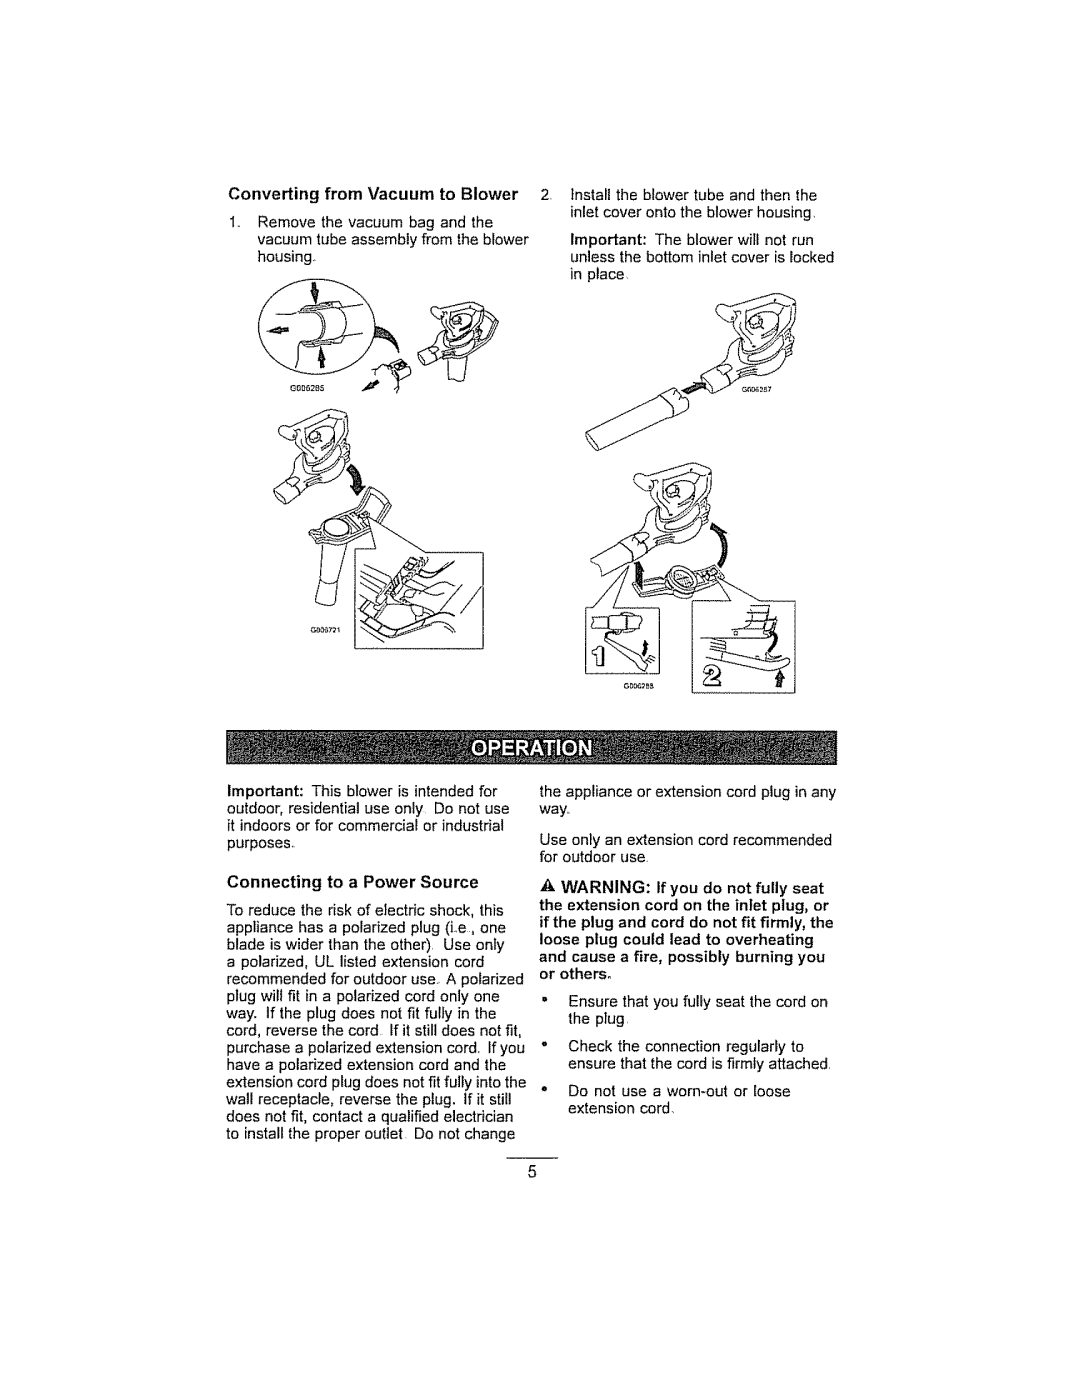 Craftsman 136.748270, G006299, 280030785 manual Converting from Vacuum to Blower, Connecting to a Power Source 